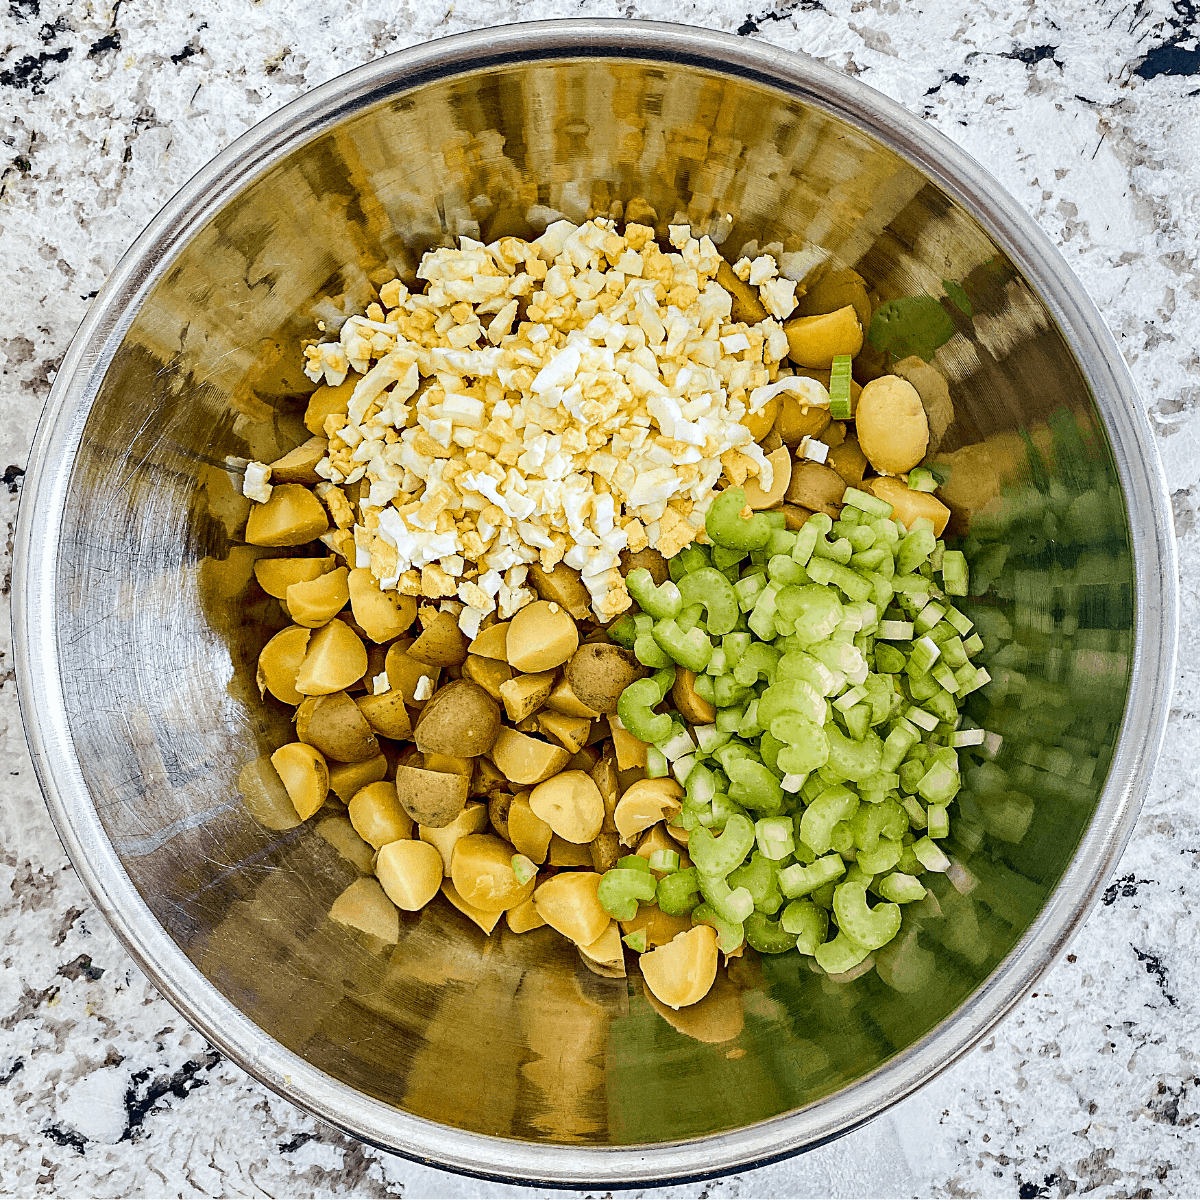 In a large steel mixing bowl: quartered cooked gold potatoes, chopped eggs, and chopped celery.